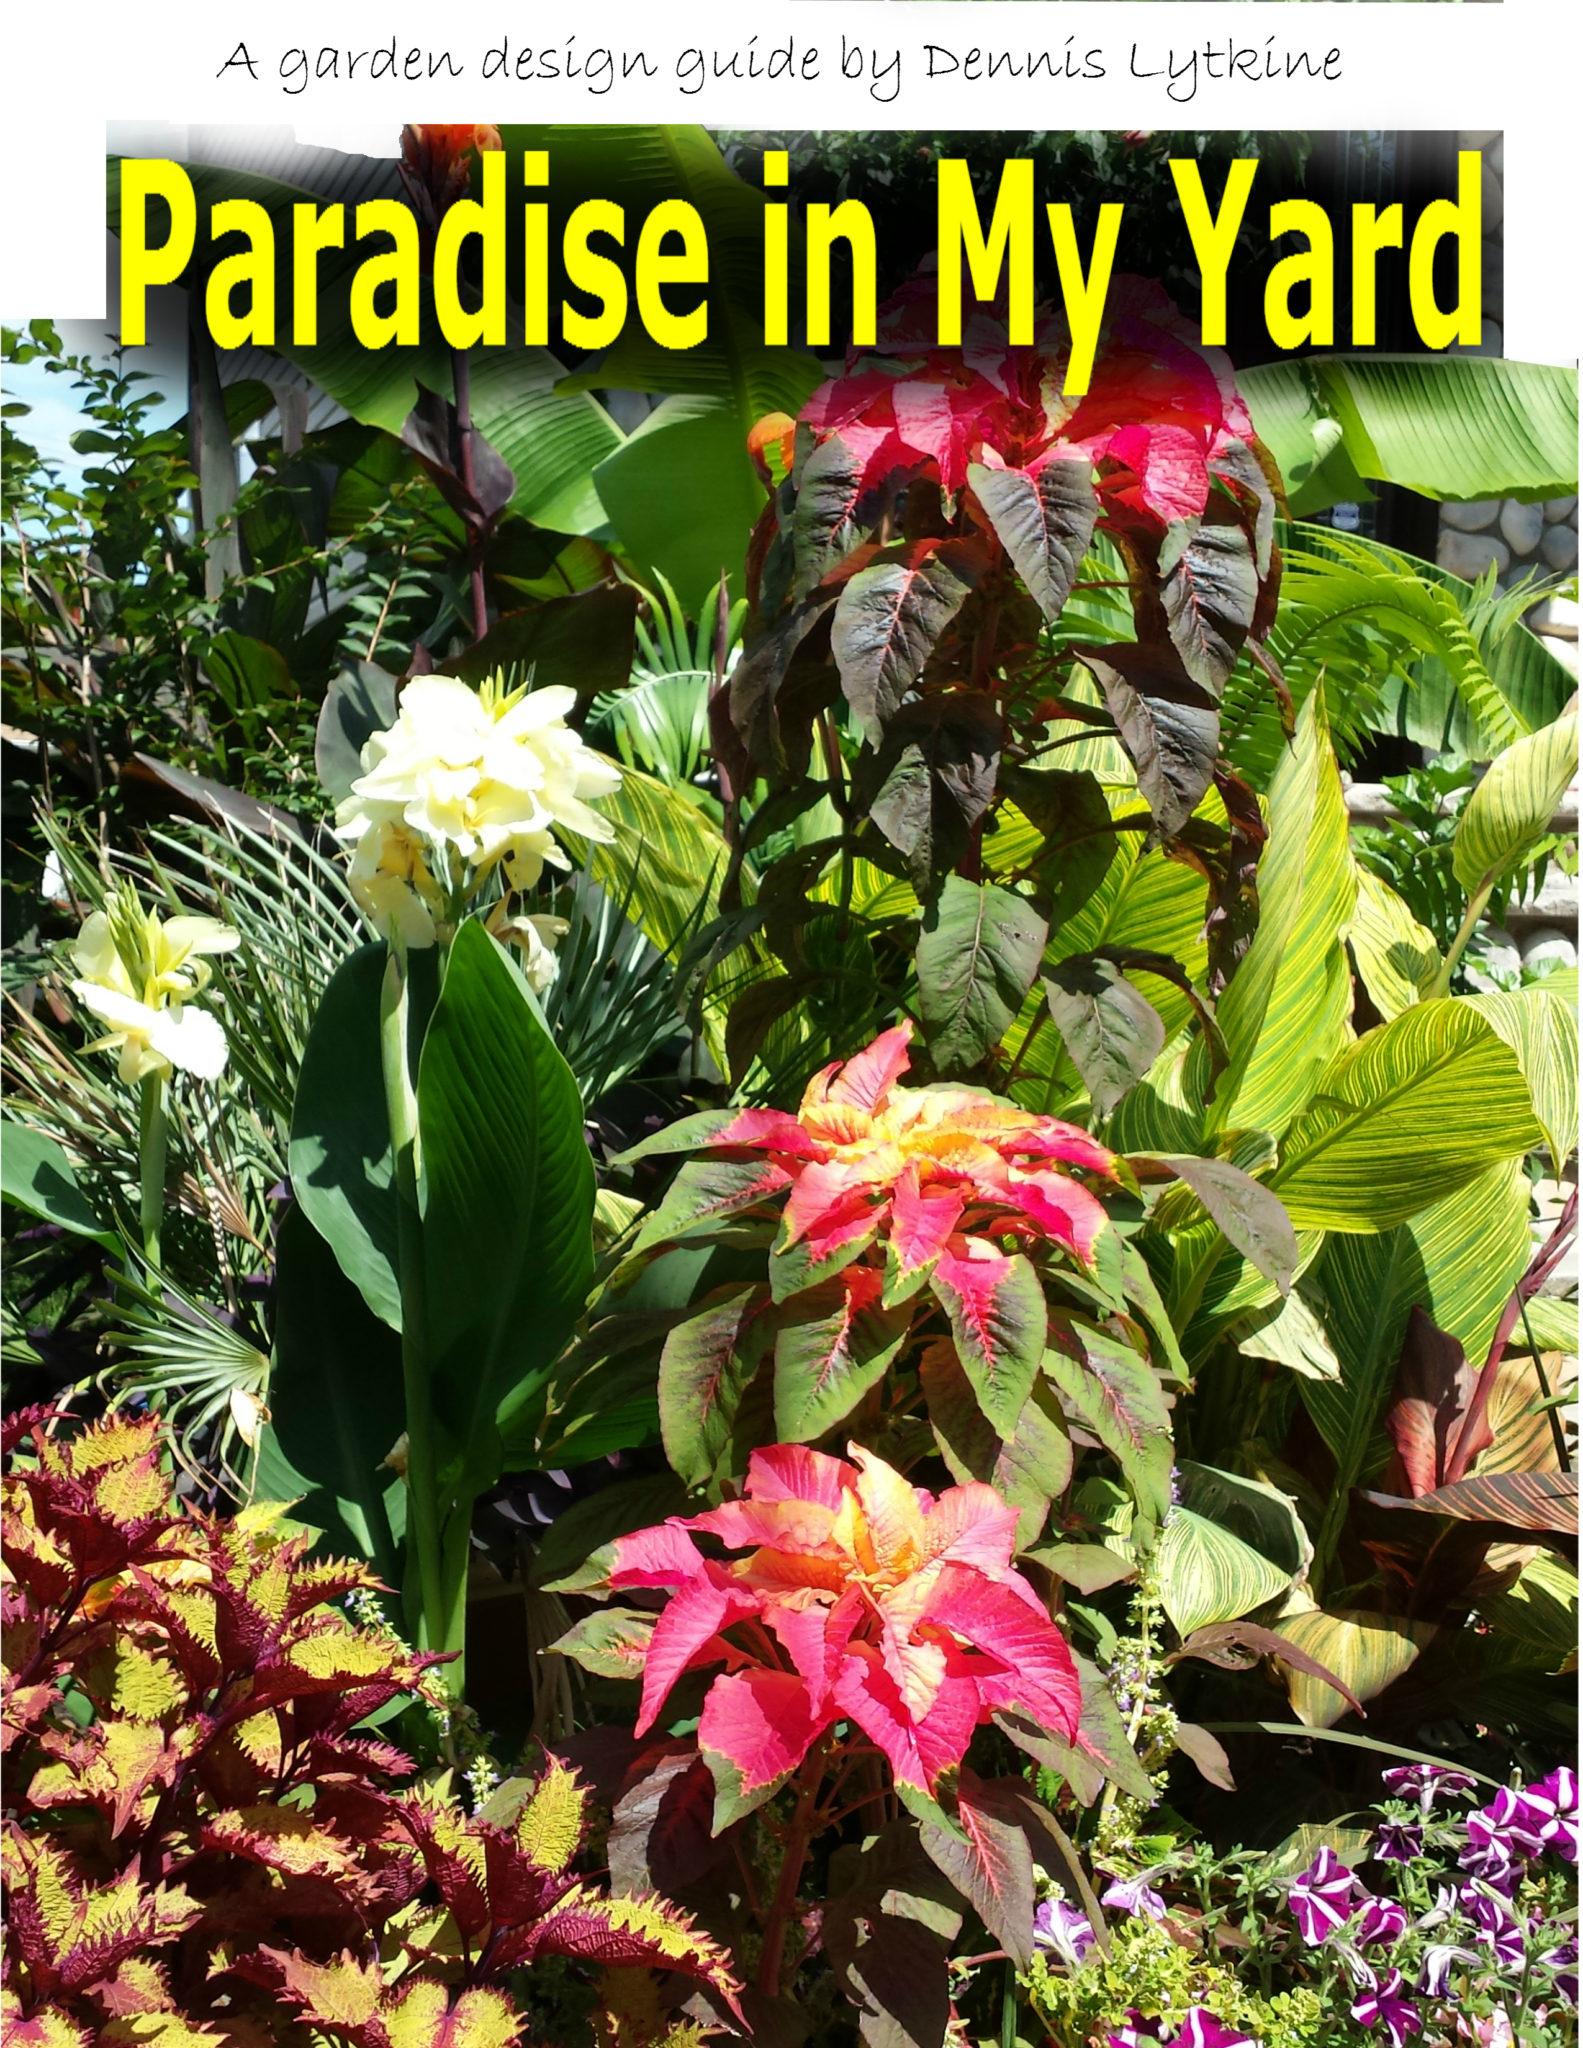 FREE: Paradise in My Yard: A Garden Design Guide by Dennis Lytkine